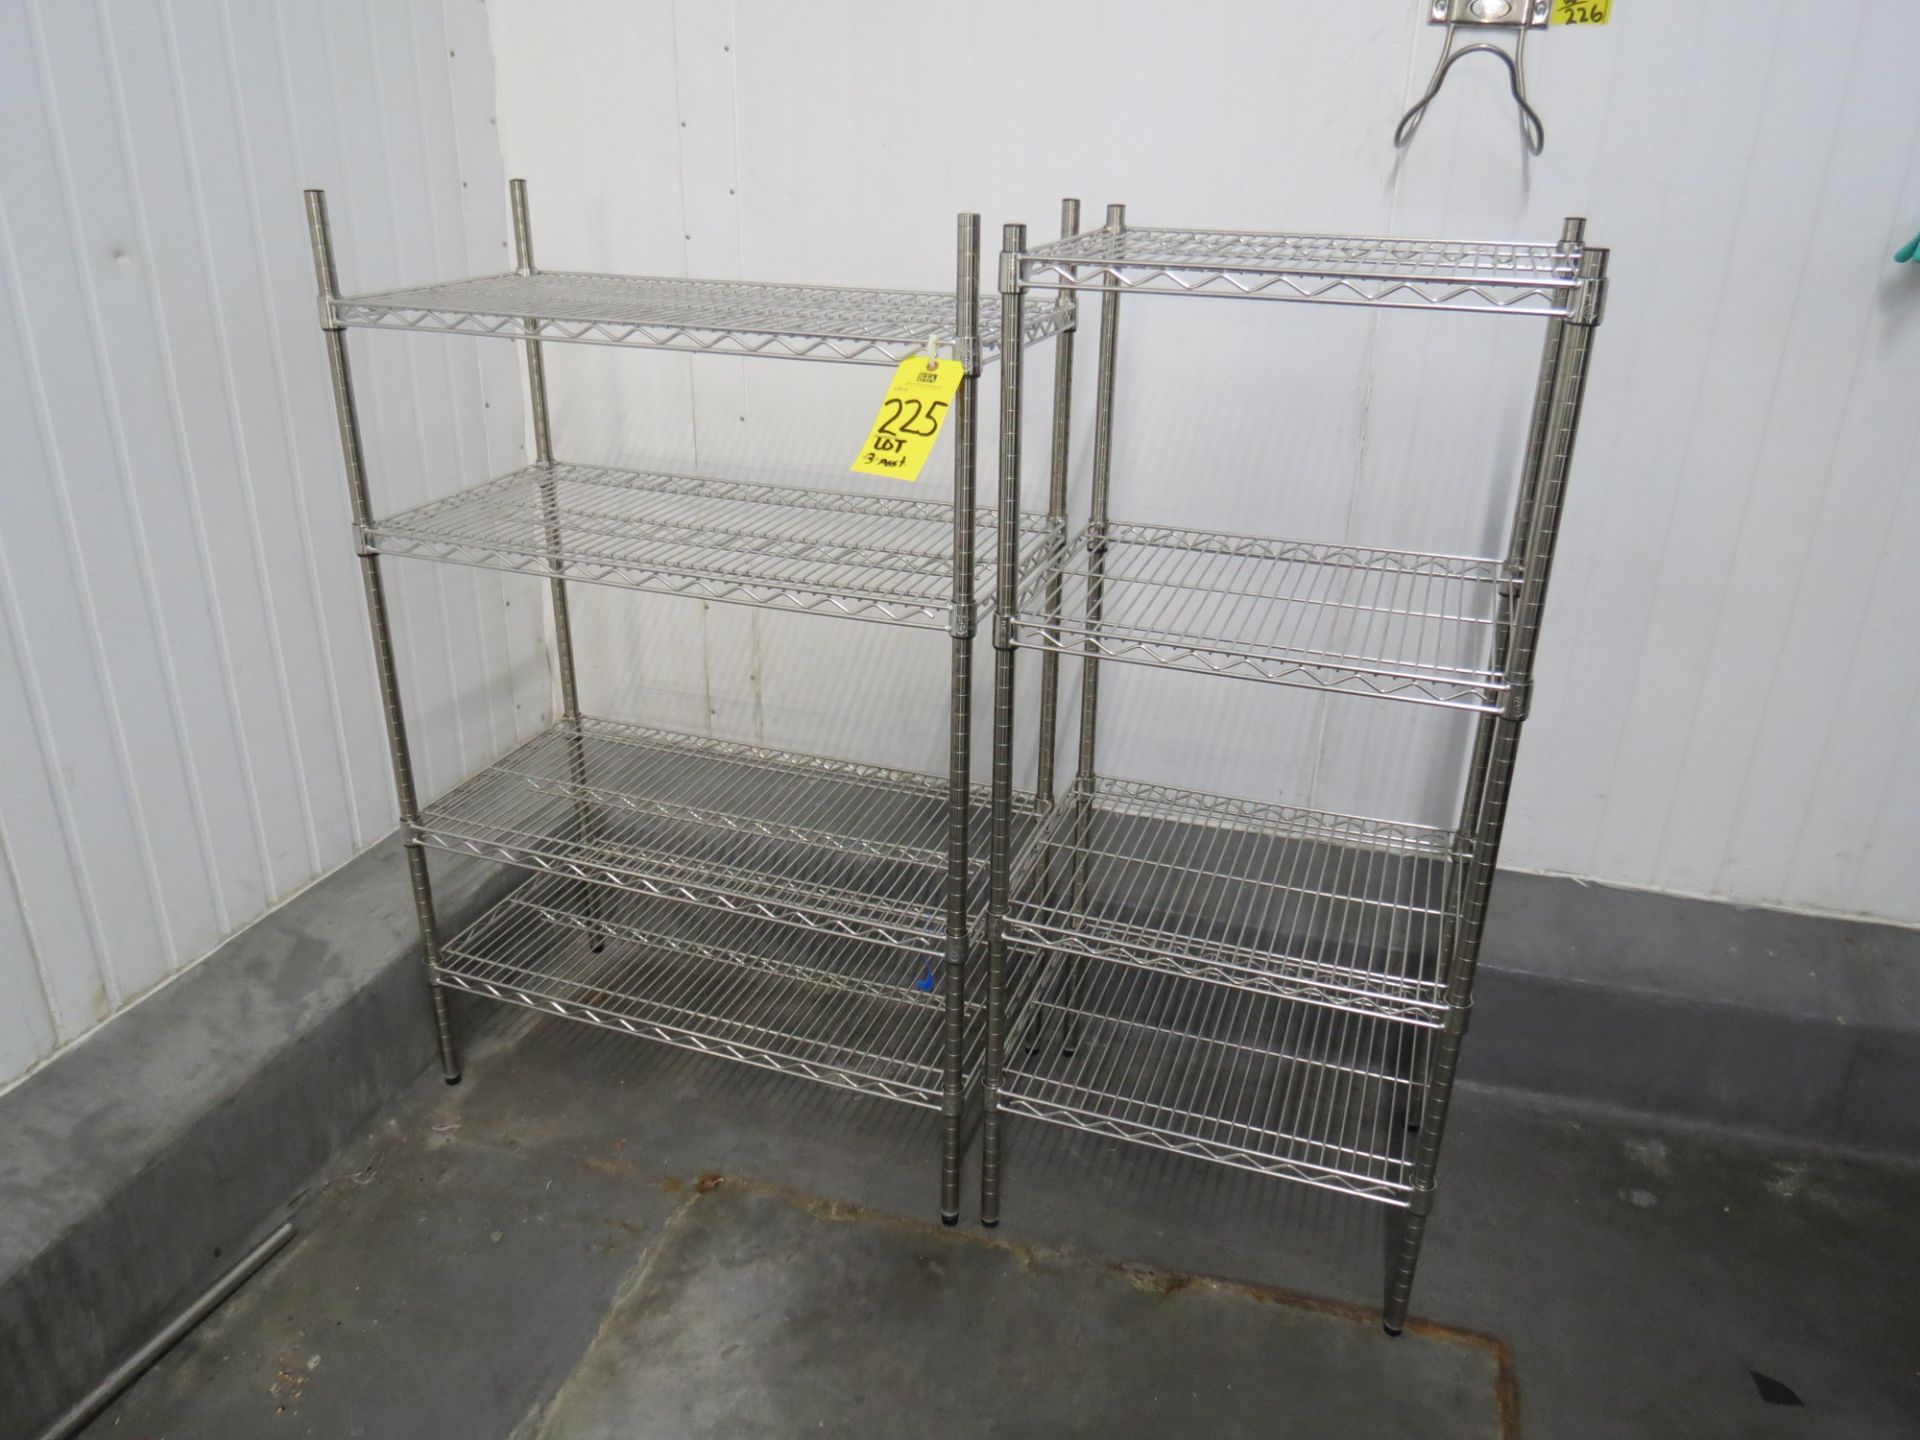 Lot of Assorted Stationary Racks (2) Chrome Wire Type and (1) Stainless Steel